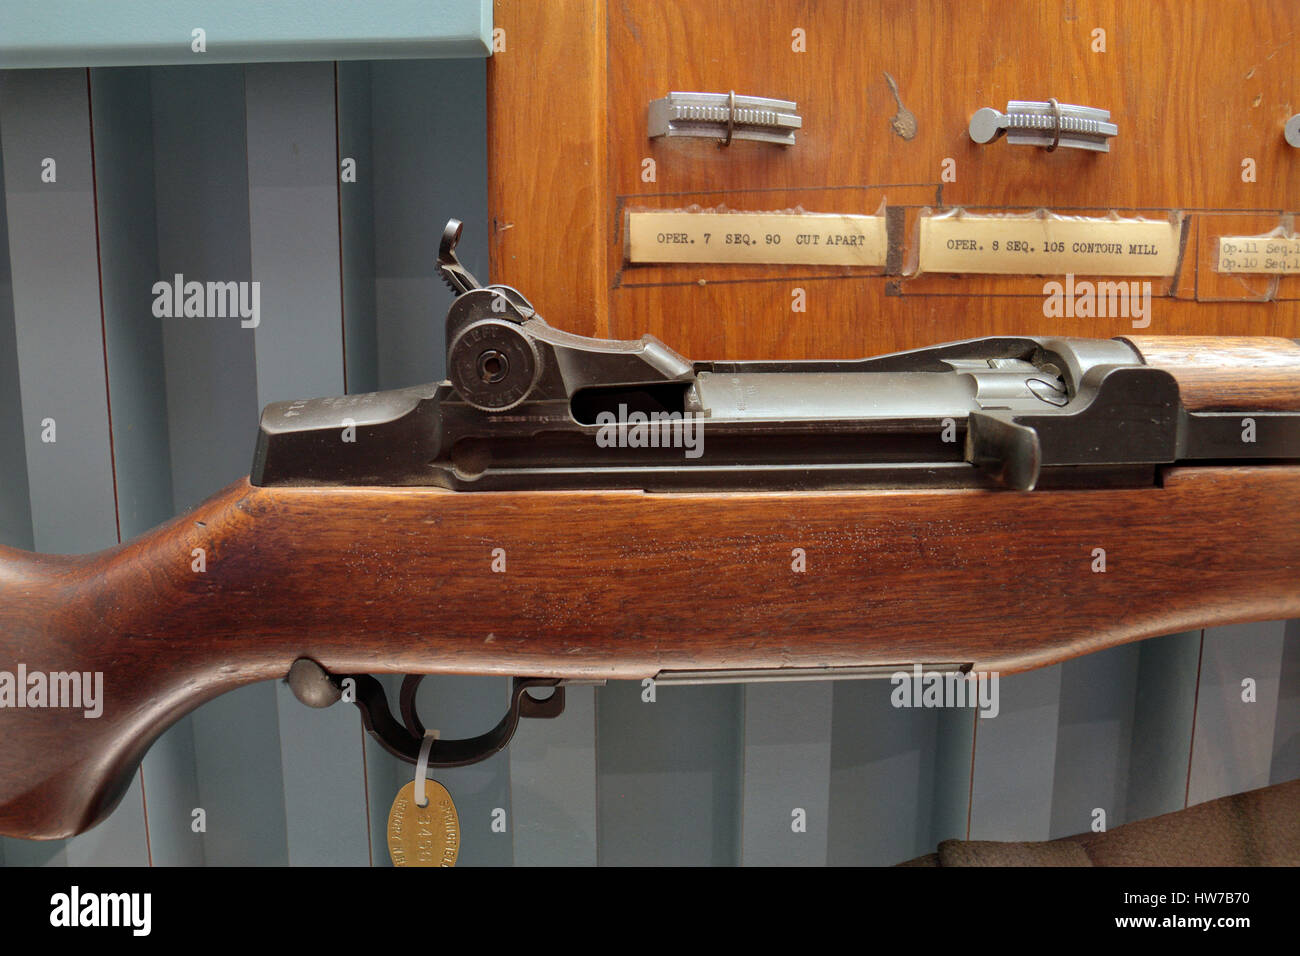 The breech on an M1 Garand rifle from World War II on display in the Springfield Armory National Historic Site, Springfield, Ma, United States. Stock Photo